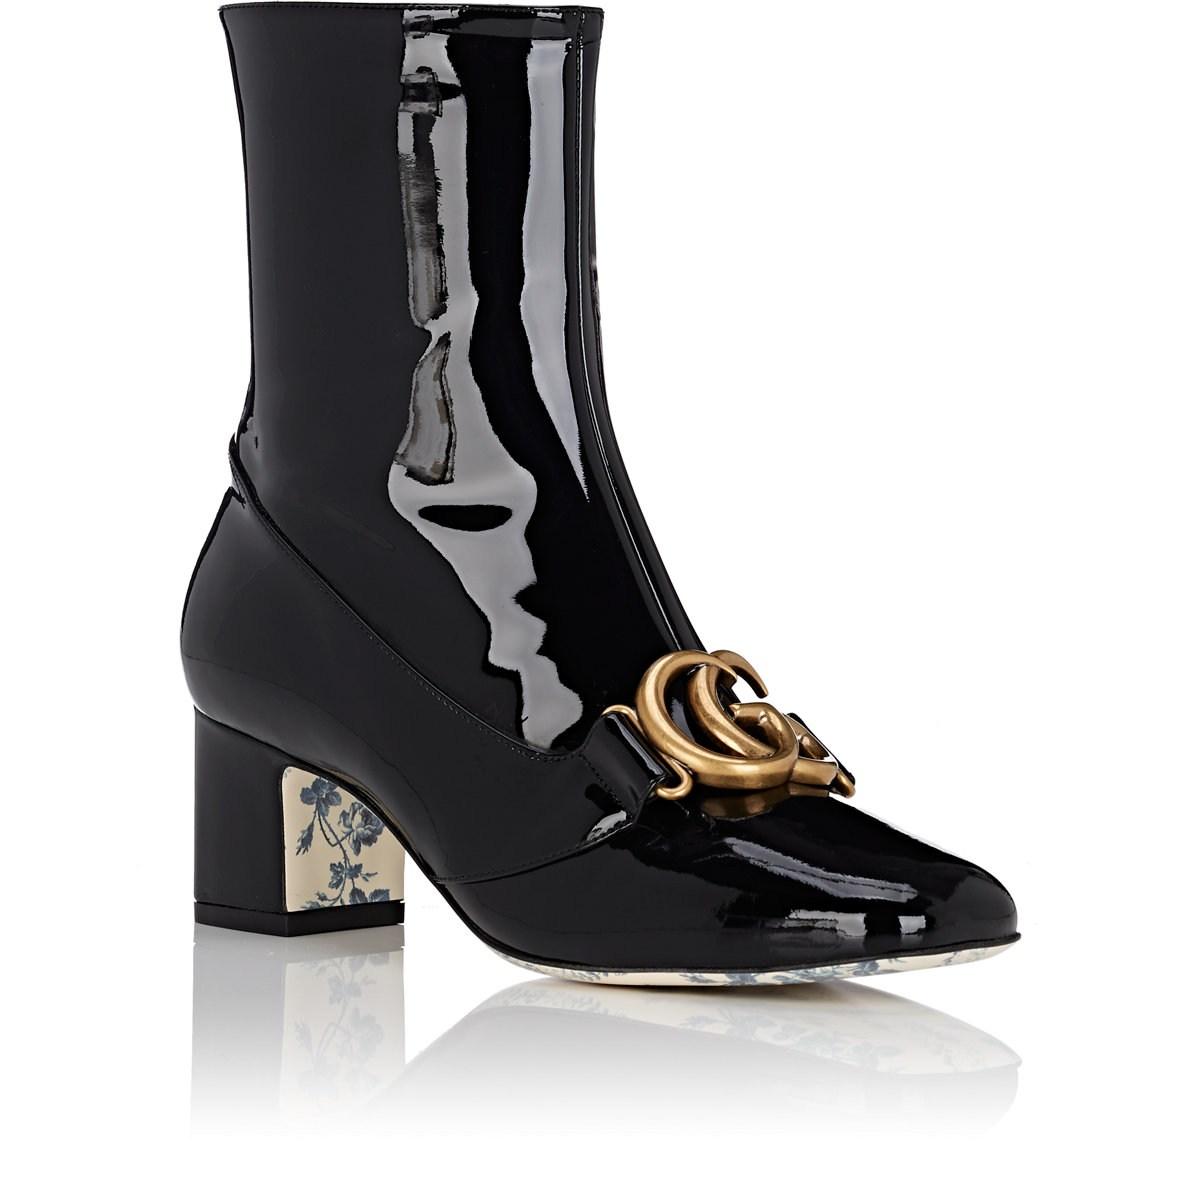 Gucci Embellished Patent Leather Ankle Boots in Black - Lyst